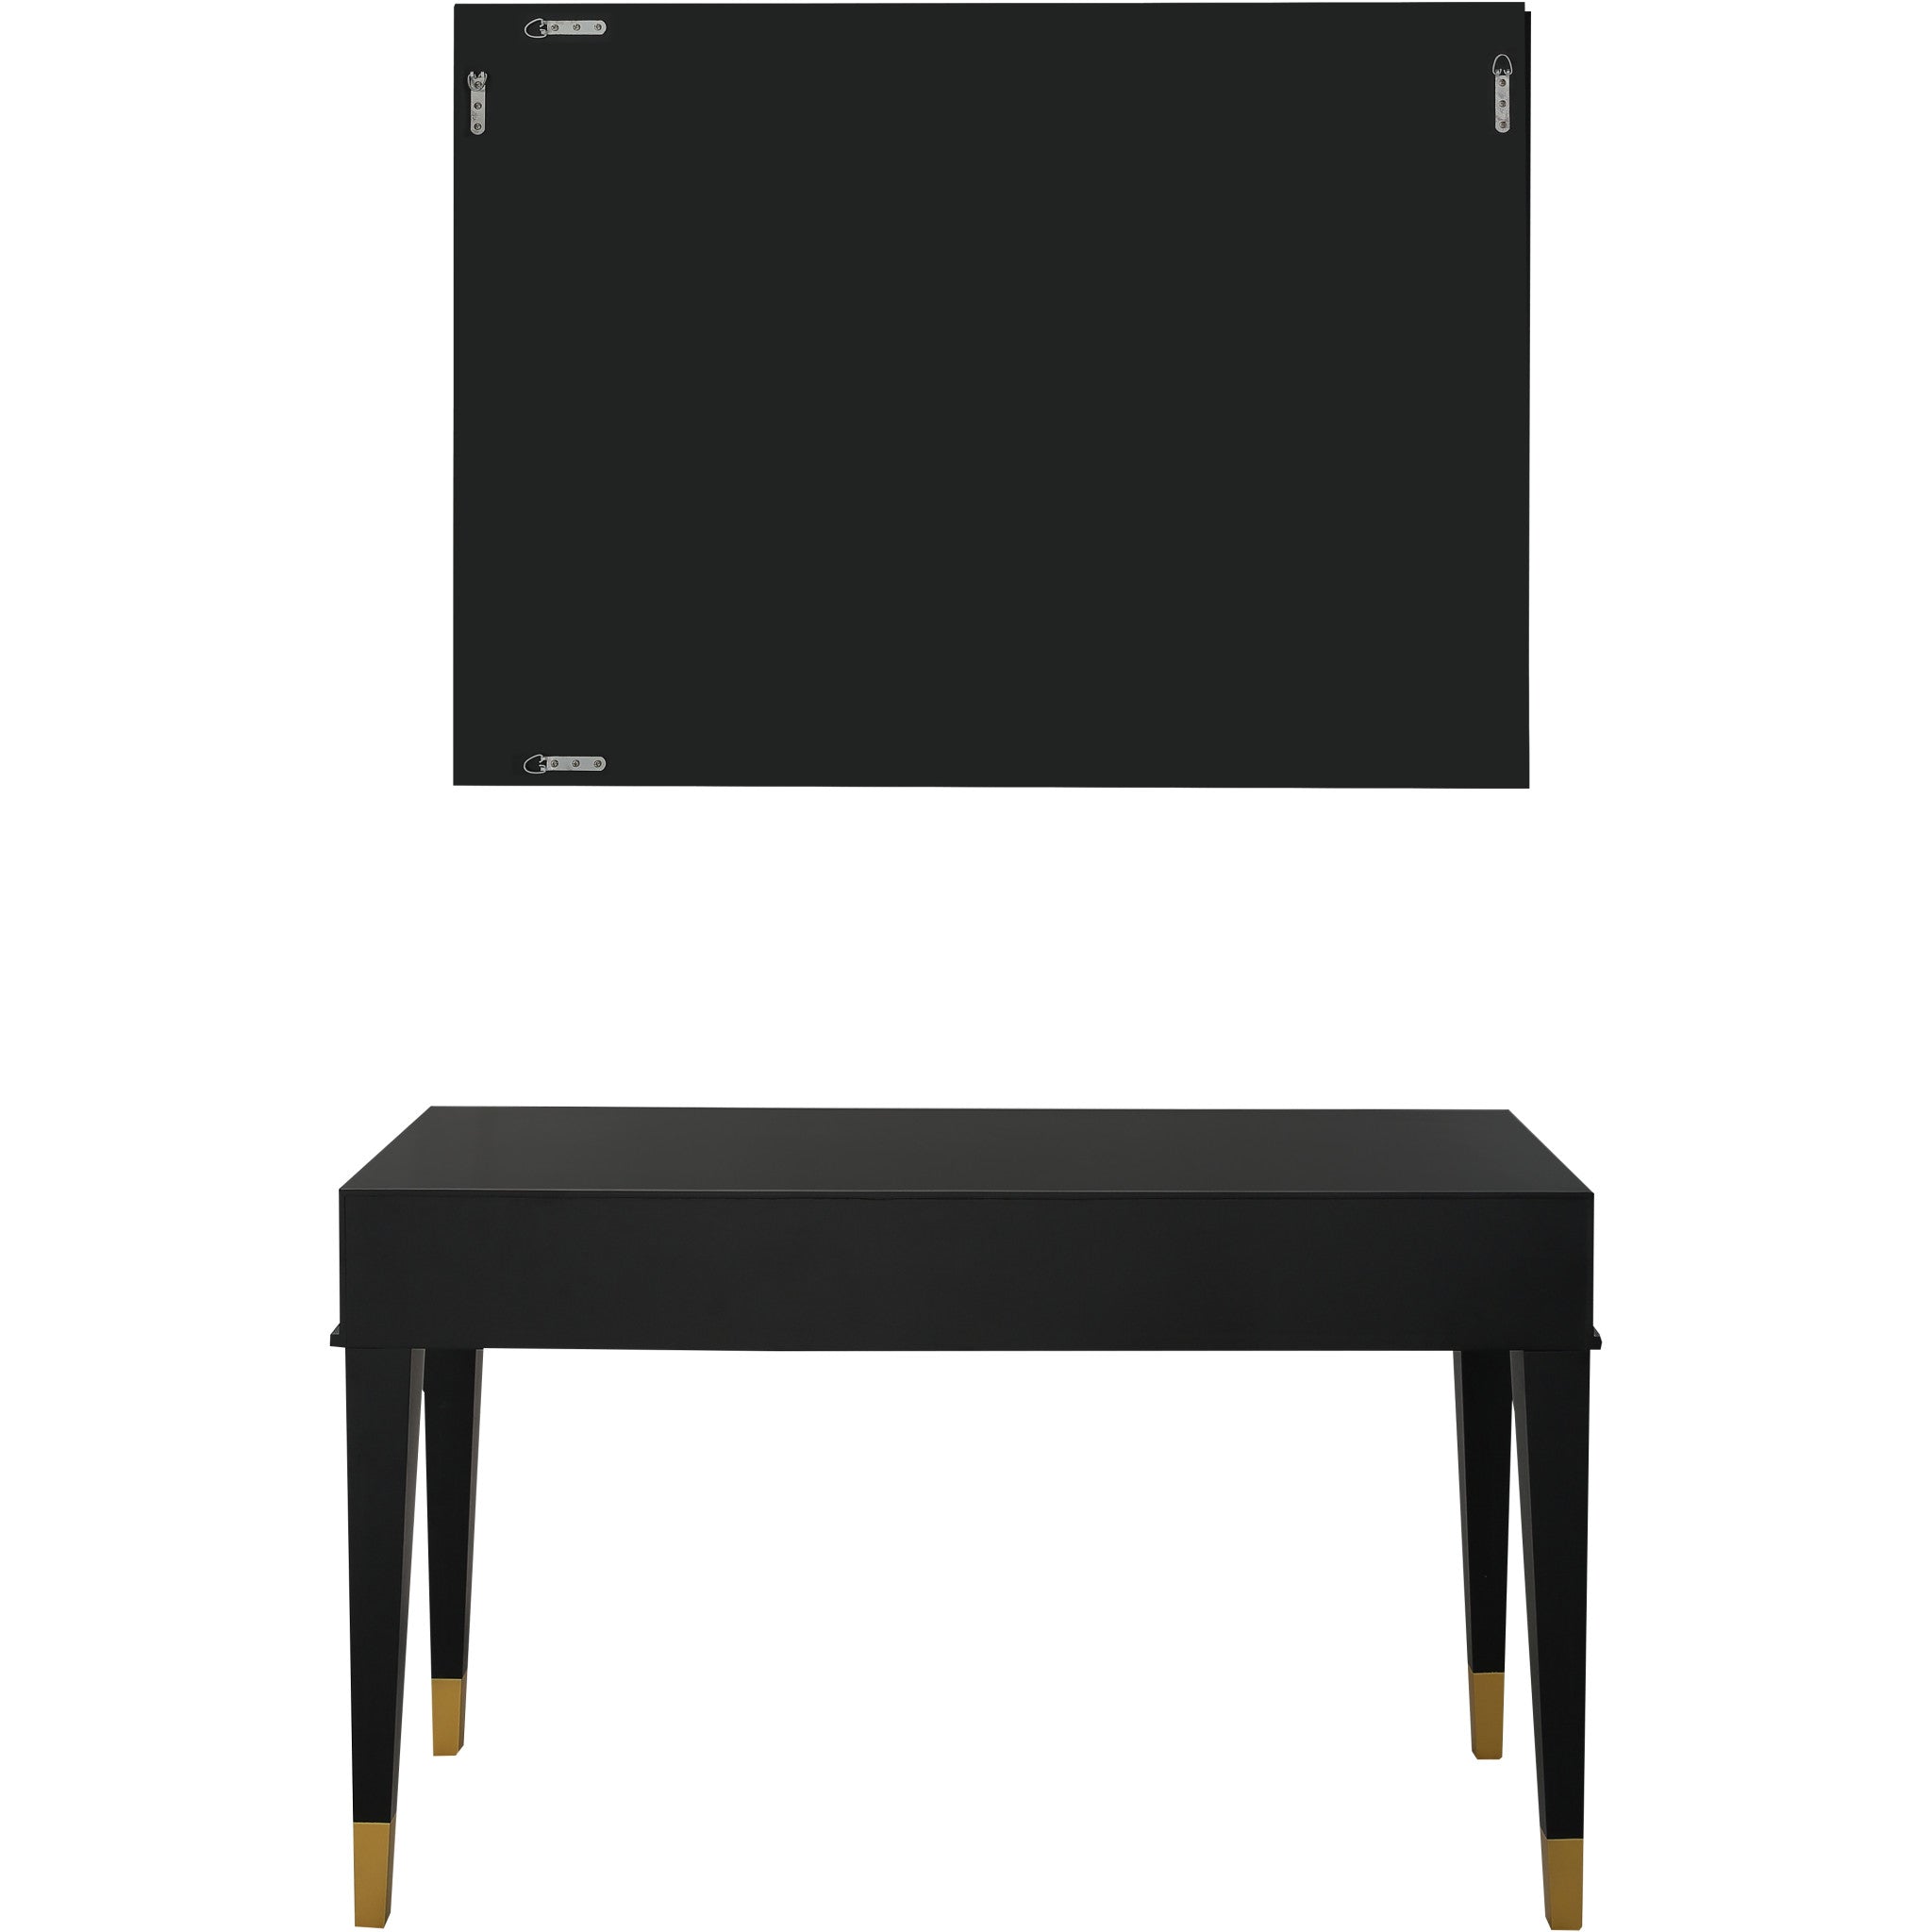 Set of Two 47" Black and Black and Gold Console Table And Drawers